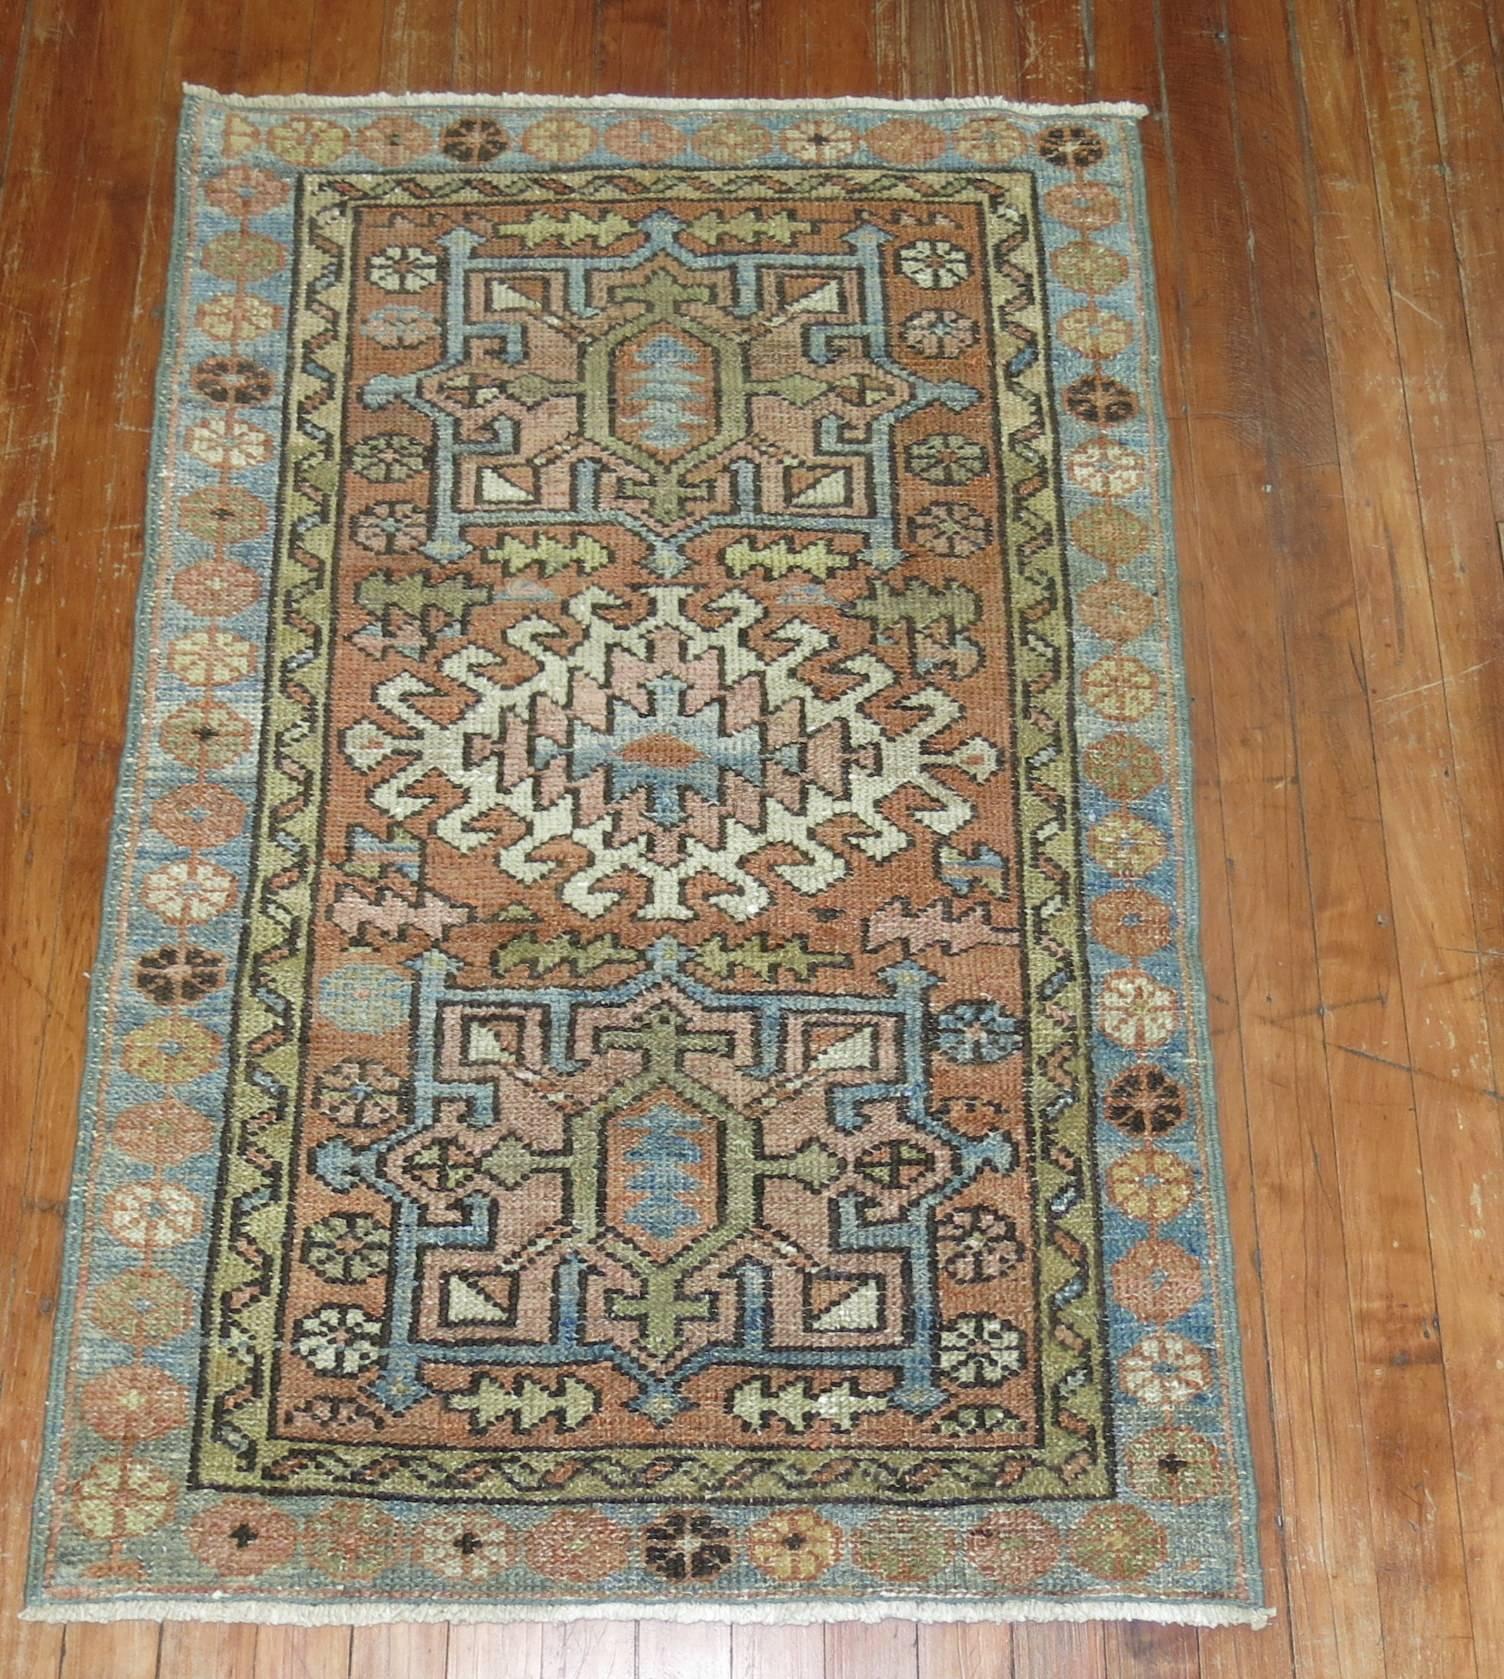 Antique Persian Heriz throw size rug featuring sky blue accents.